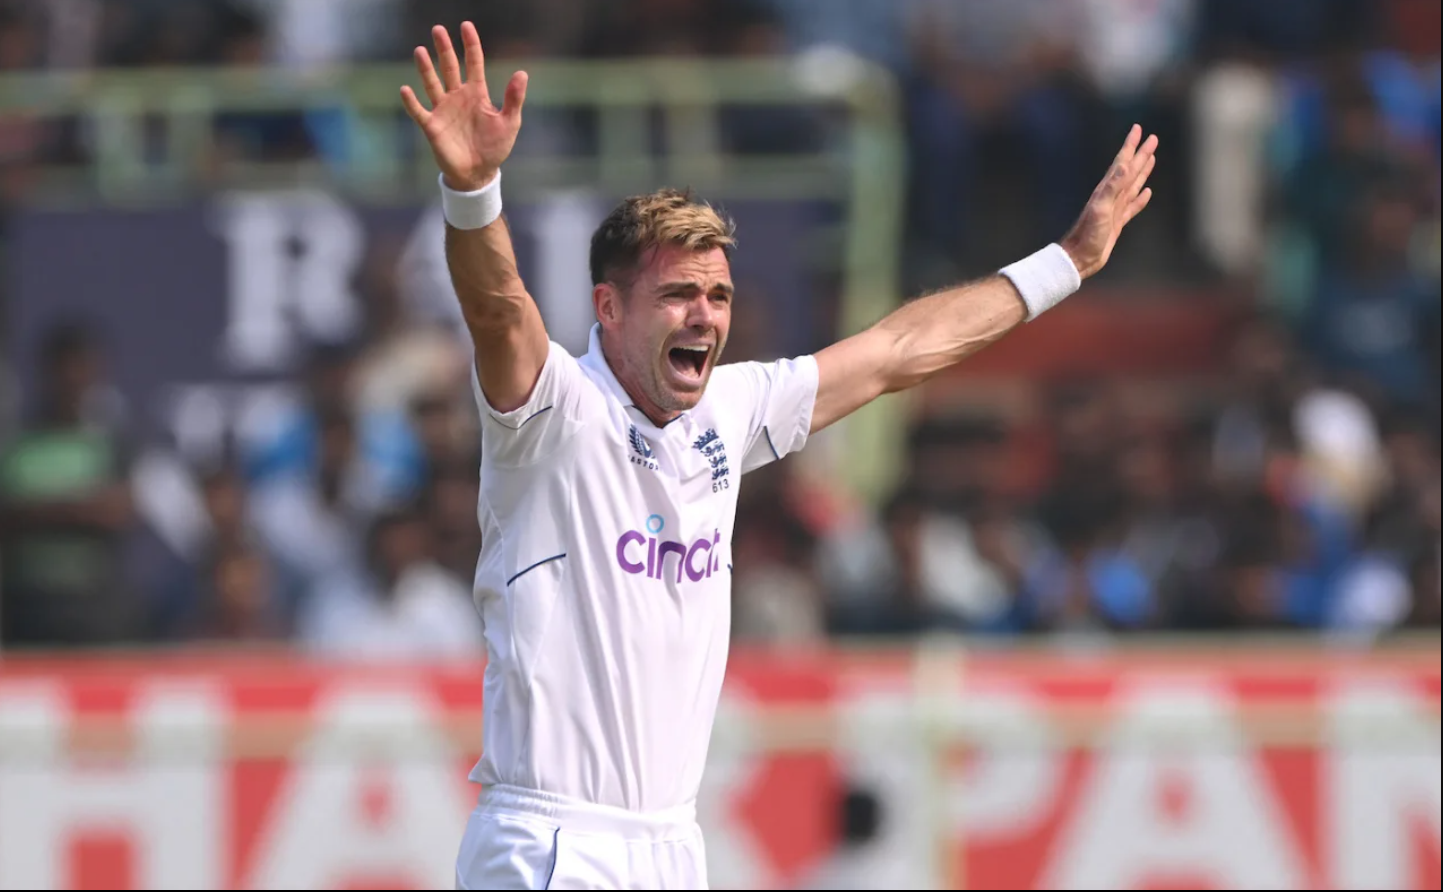 IND vs ENG: “Would Like To Go Out On A Nice Note” – James Anderson On His Retirement Plans